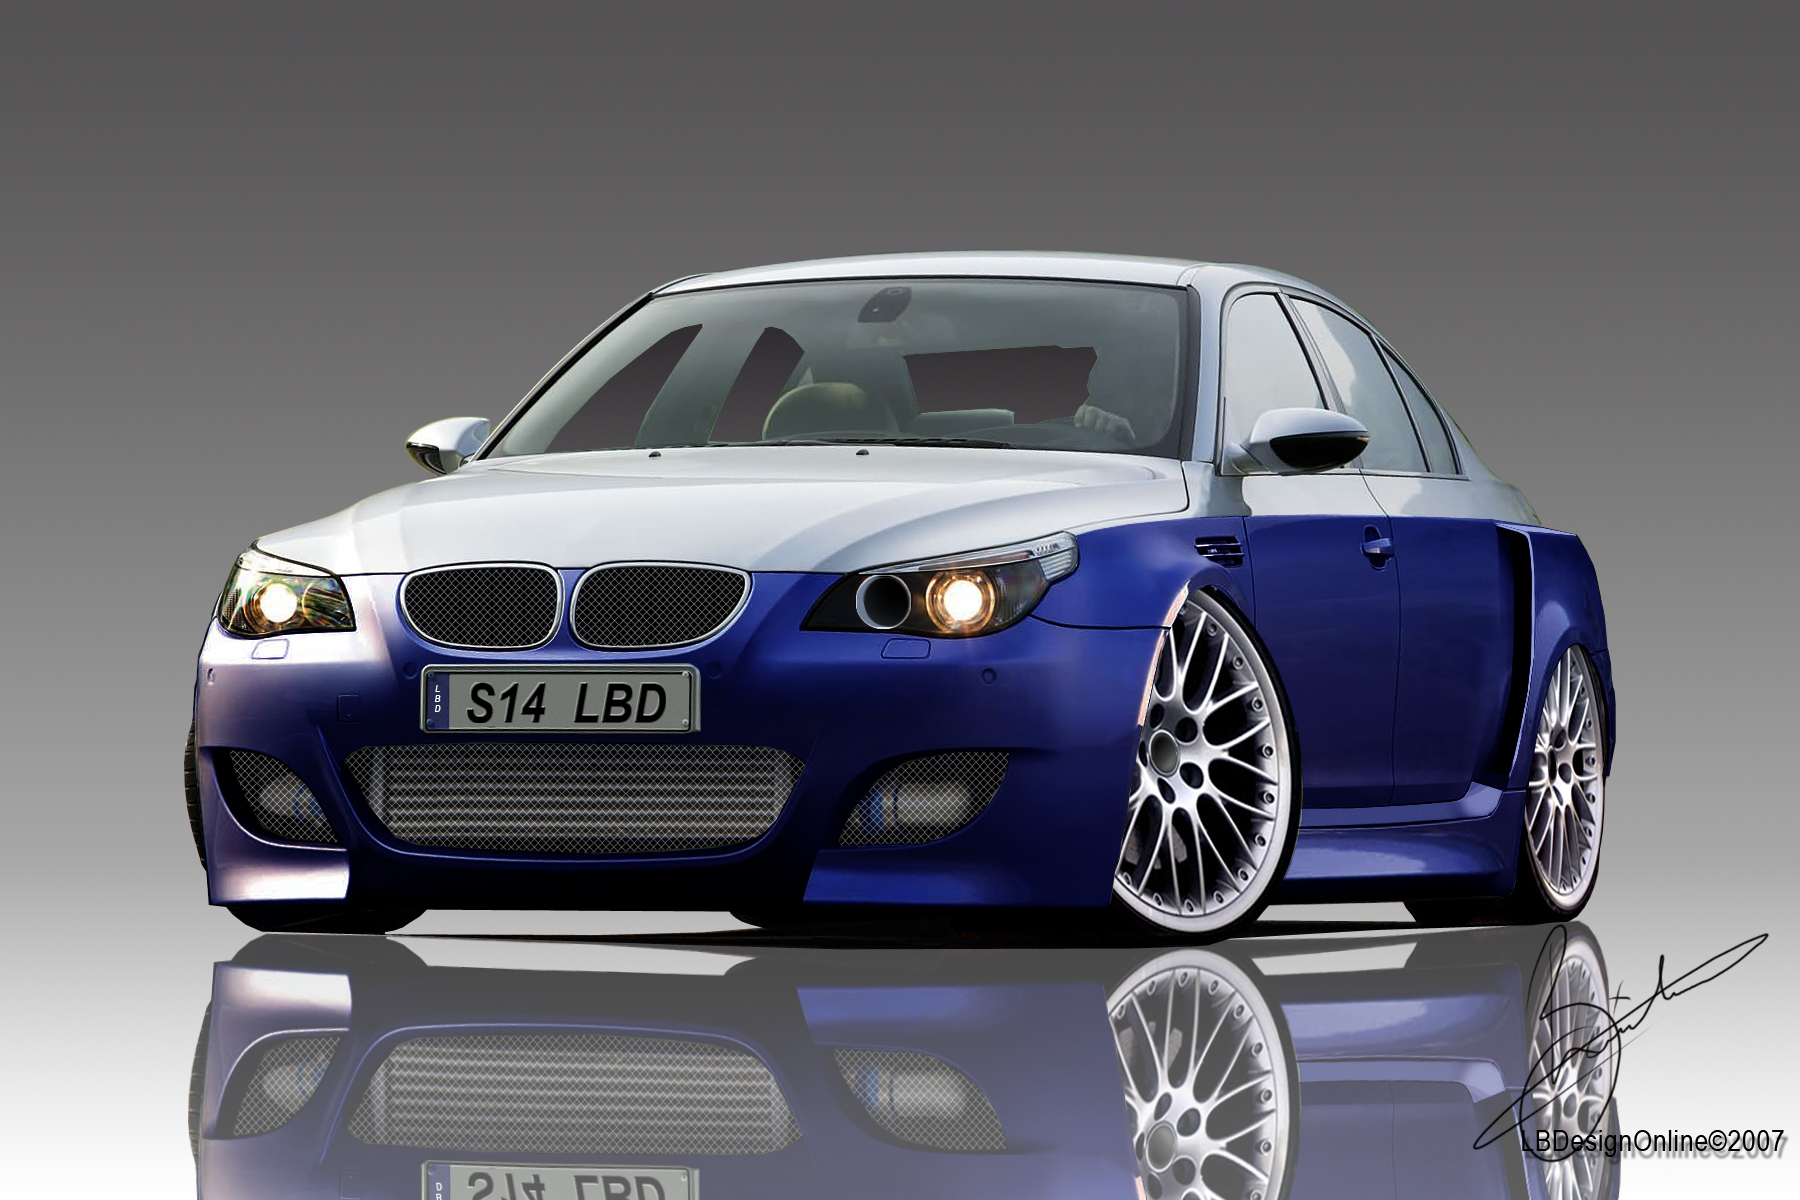 bmw wallpaper 131 you are viewing the bmw wallpaper named bmw 131 it